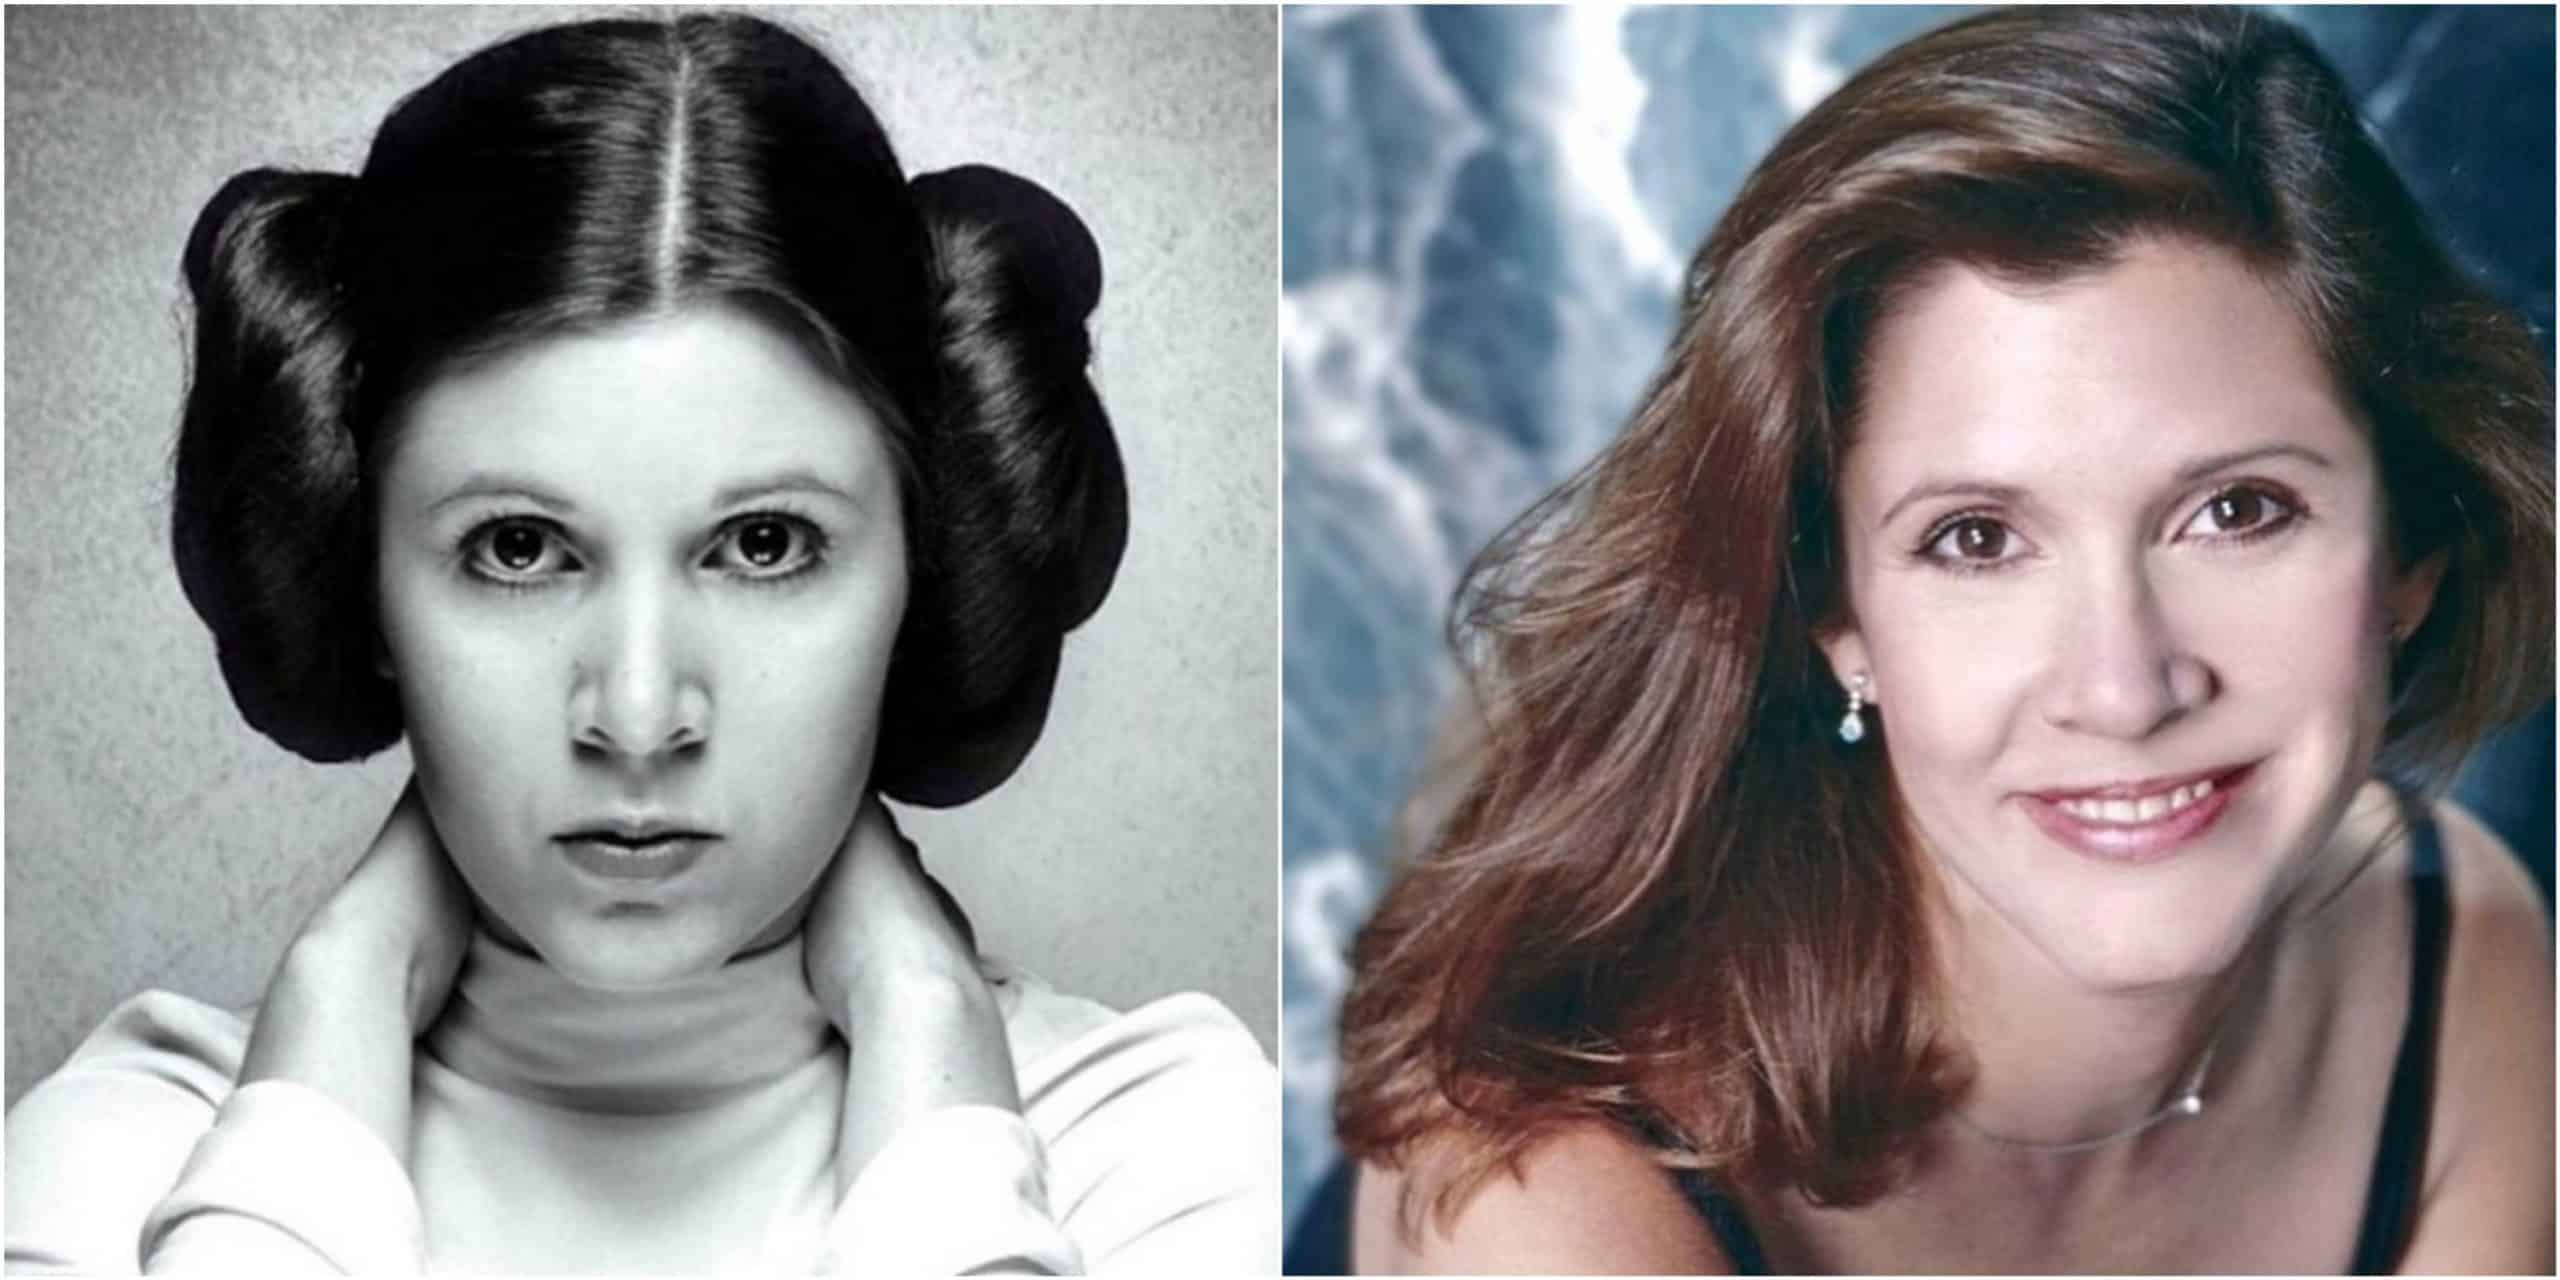 Carrie Fisher as Pincess Leia in Star Wars